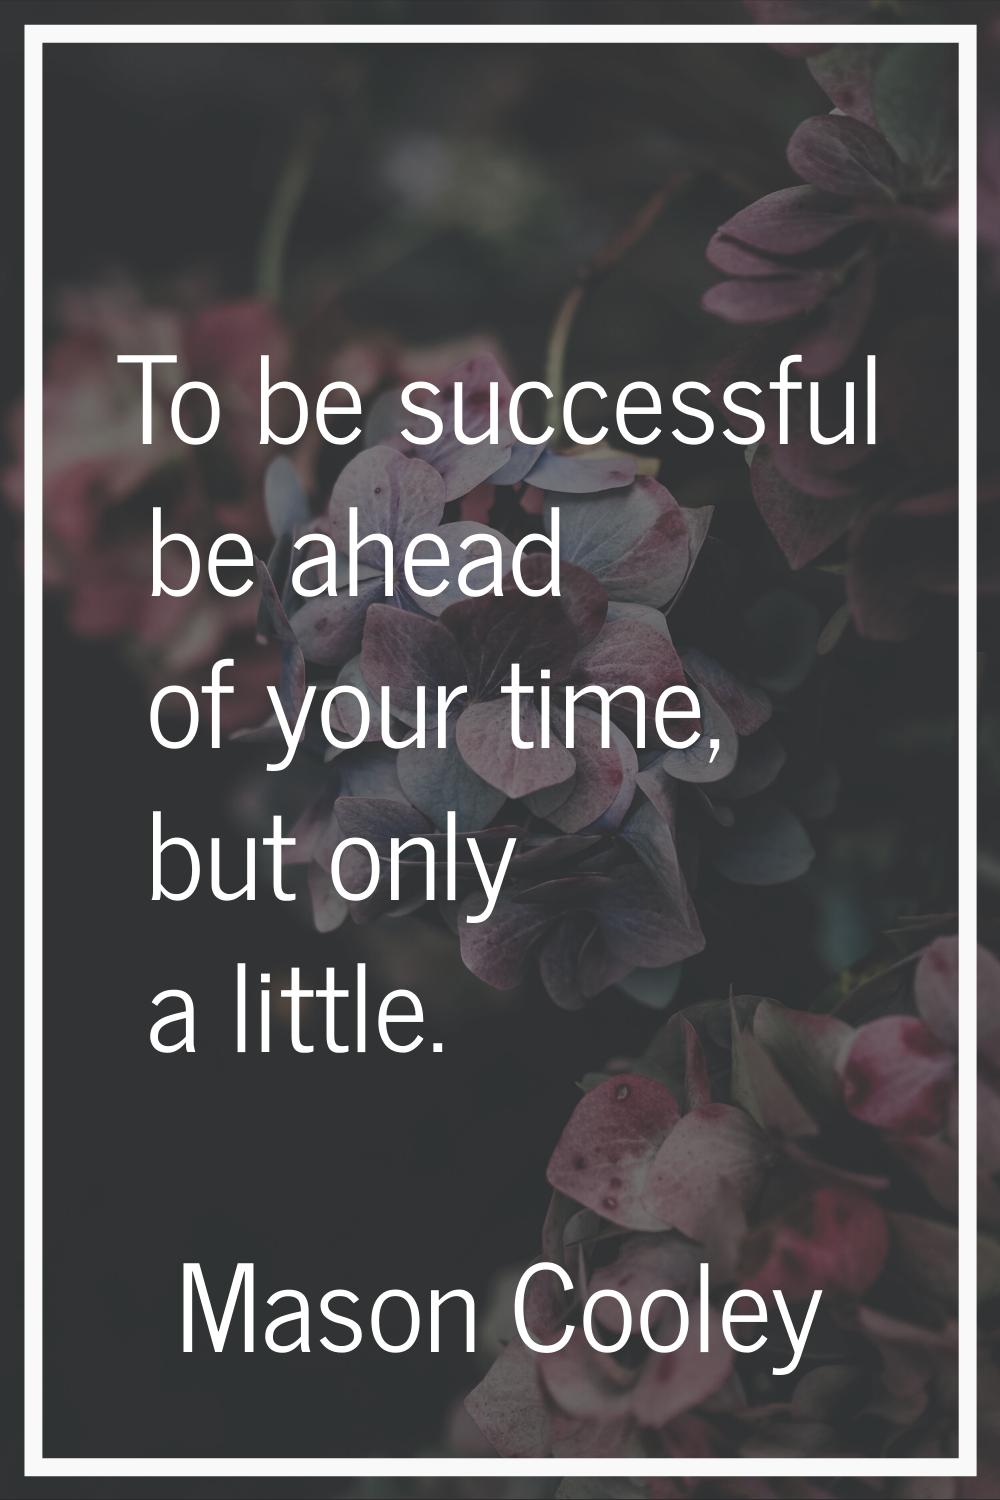 To be successful be ahead of your time, but only a little.